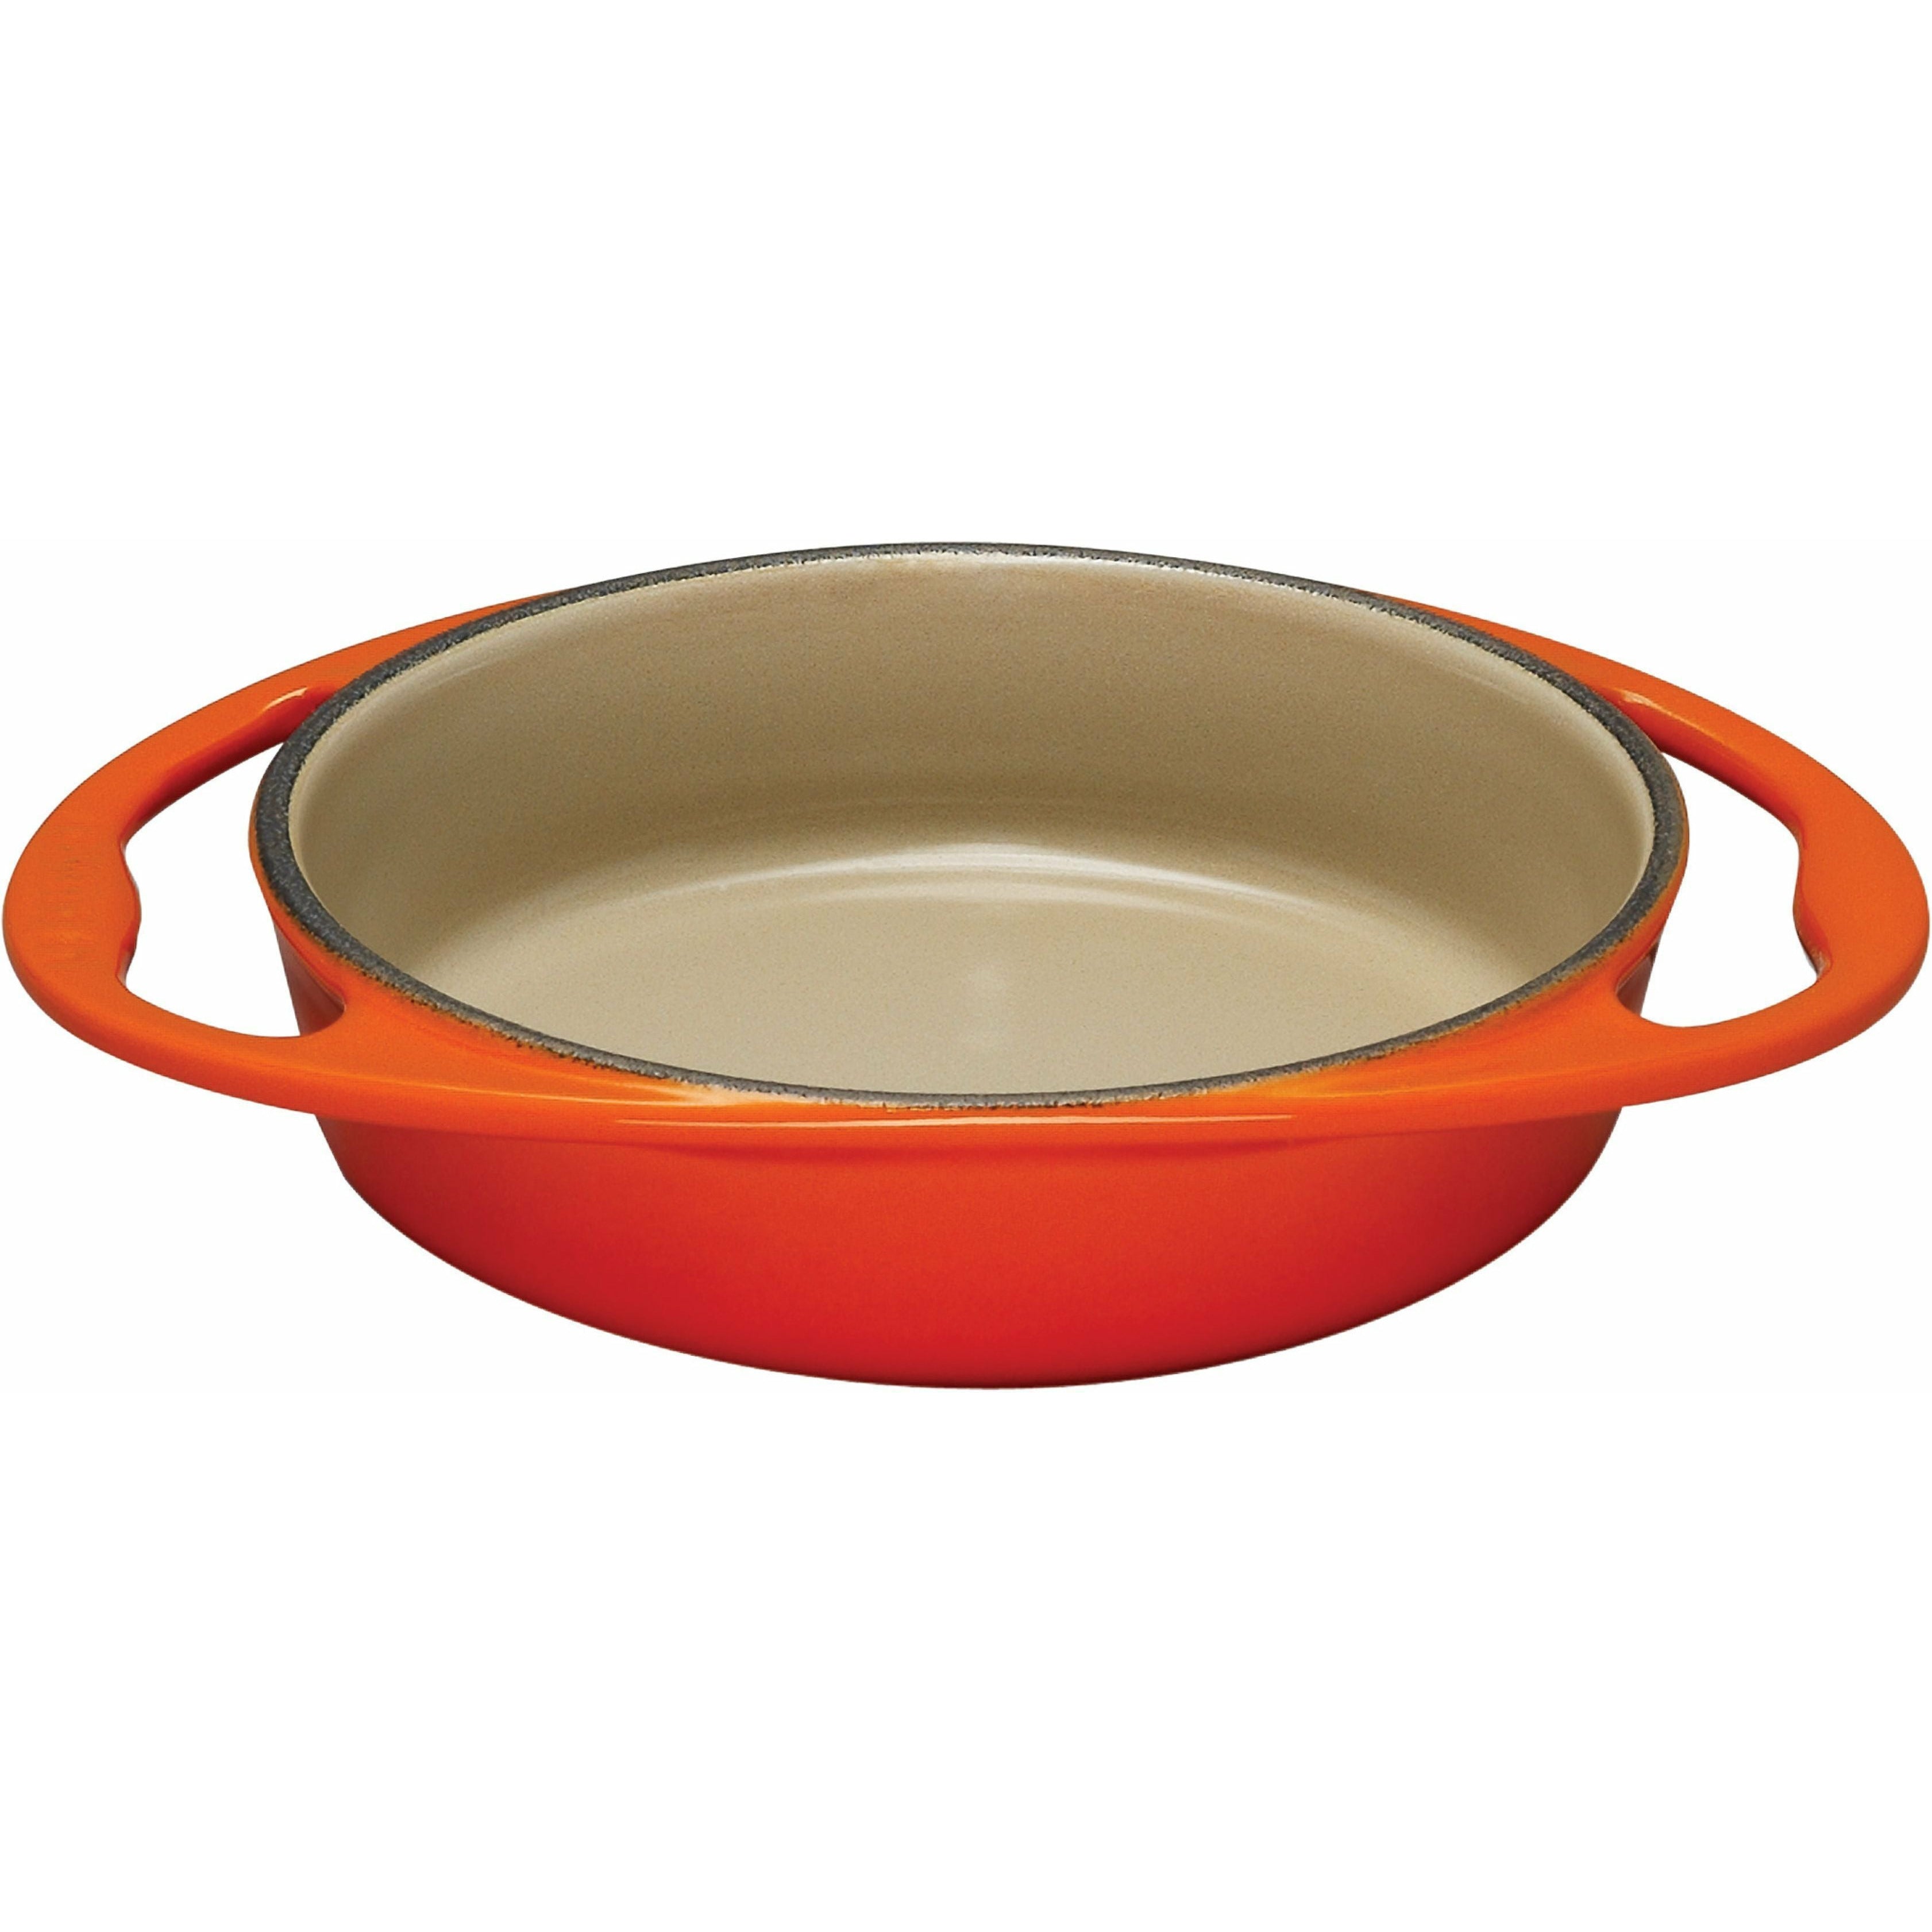 Le Creuset Tradition Tatin Baking Pan 25 Cm, Oven Red